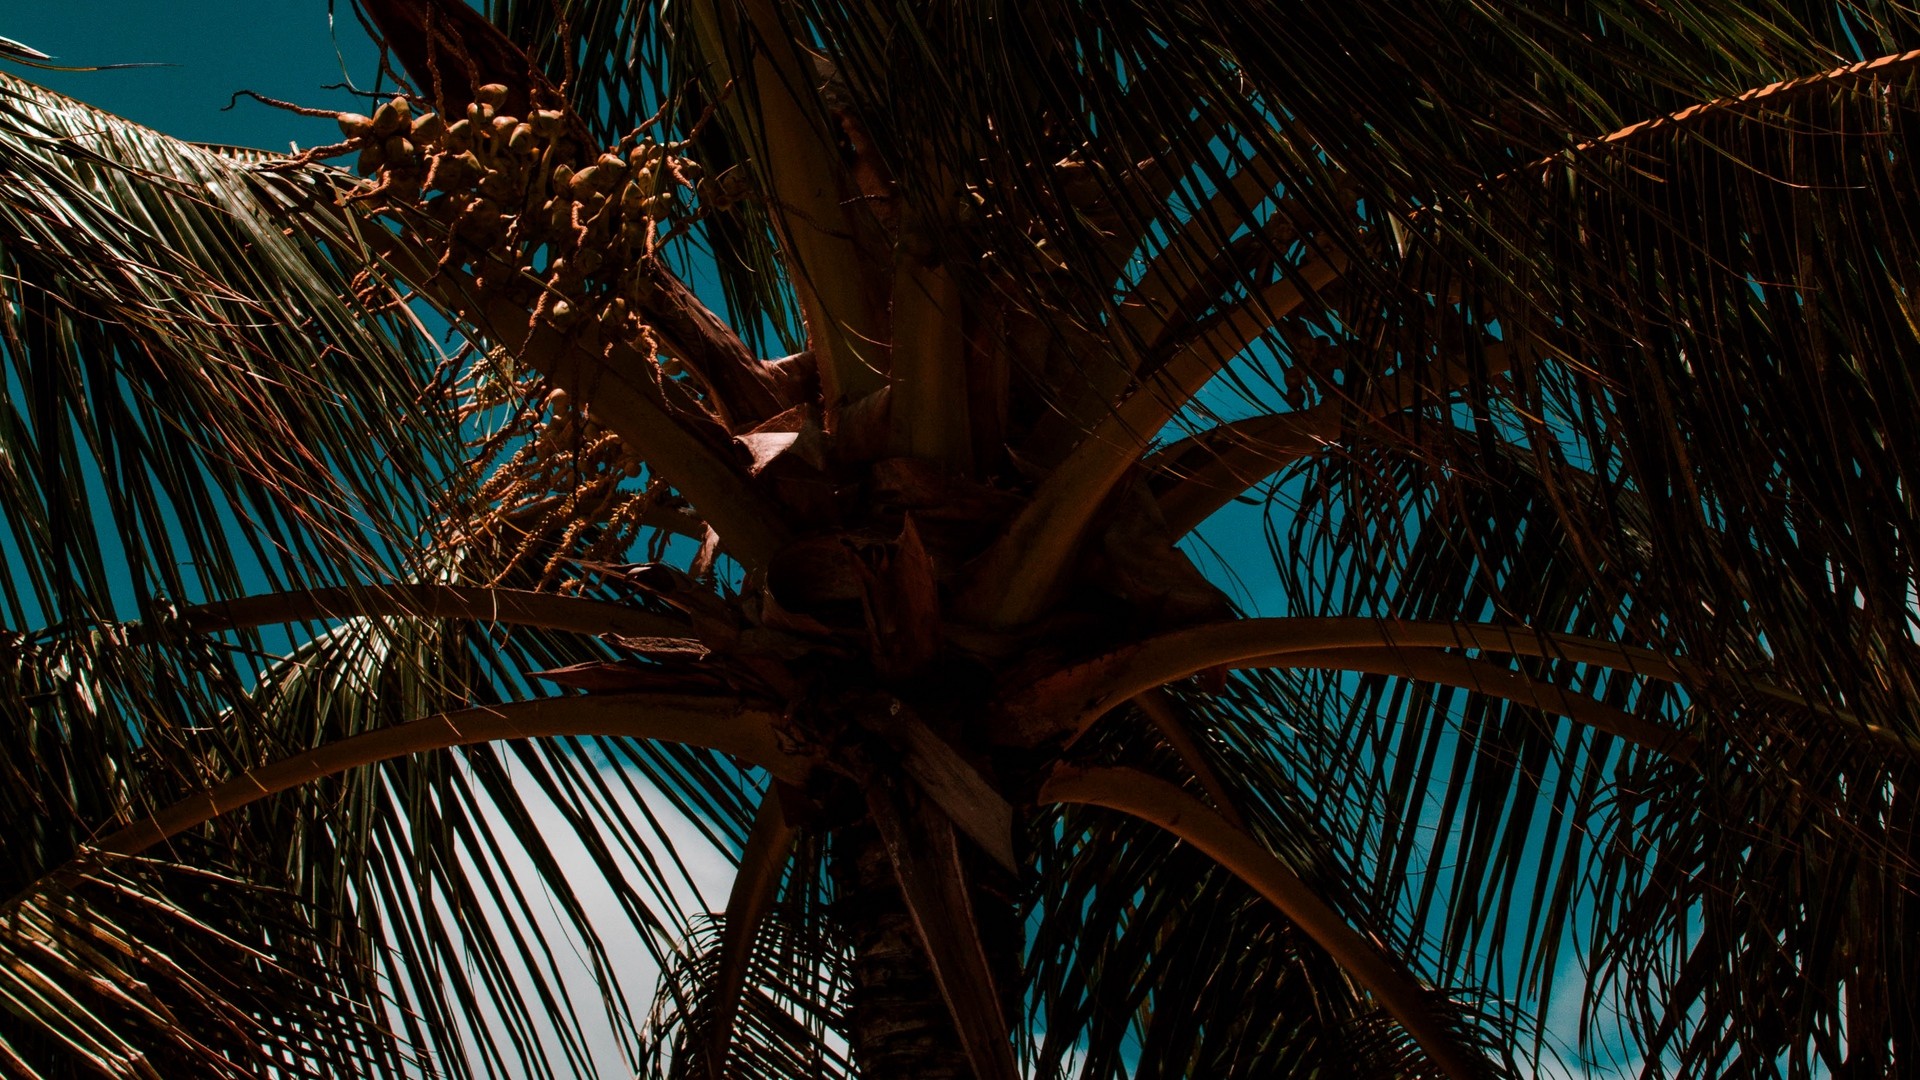 1920x1080 wallpapers: palm tree, branches, leaves, sky, wind, tropics (image)